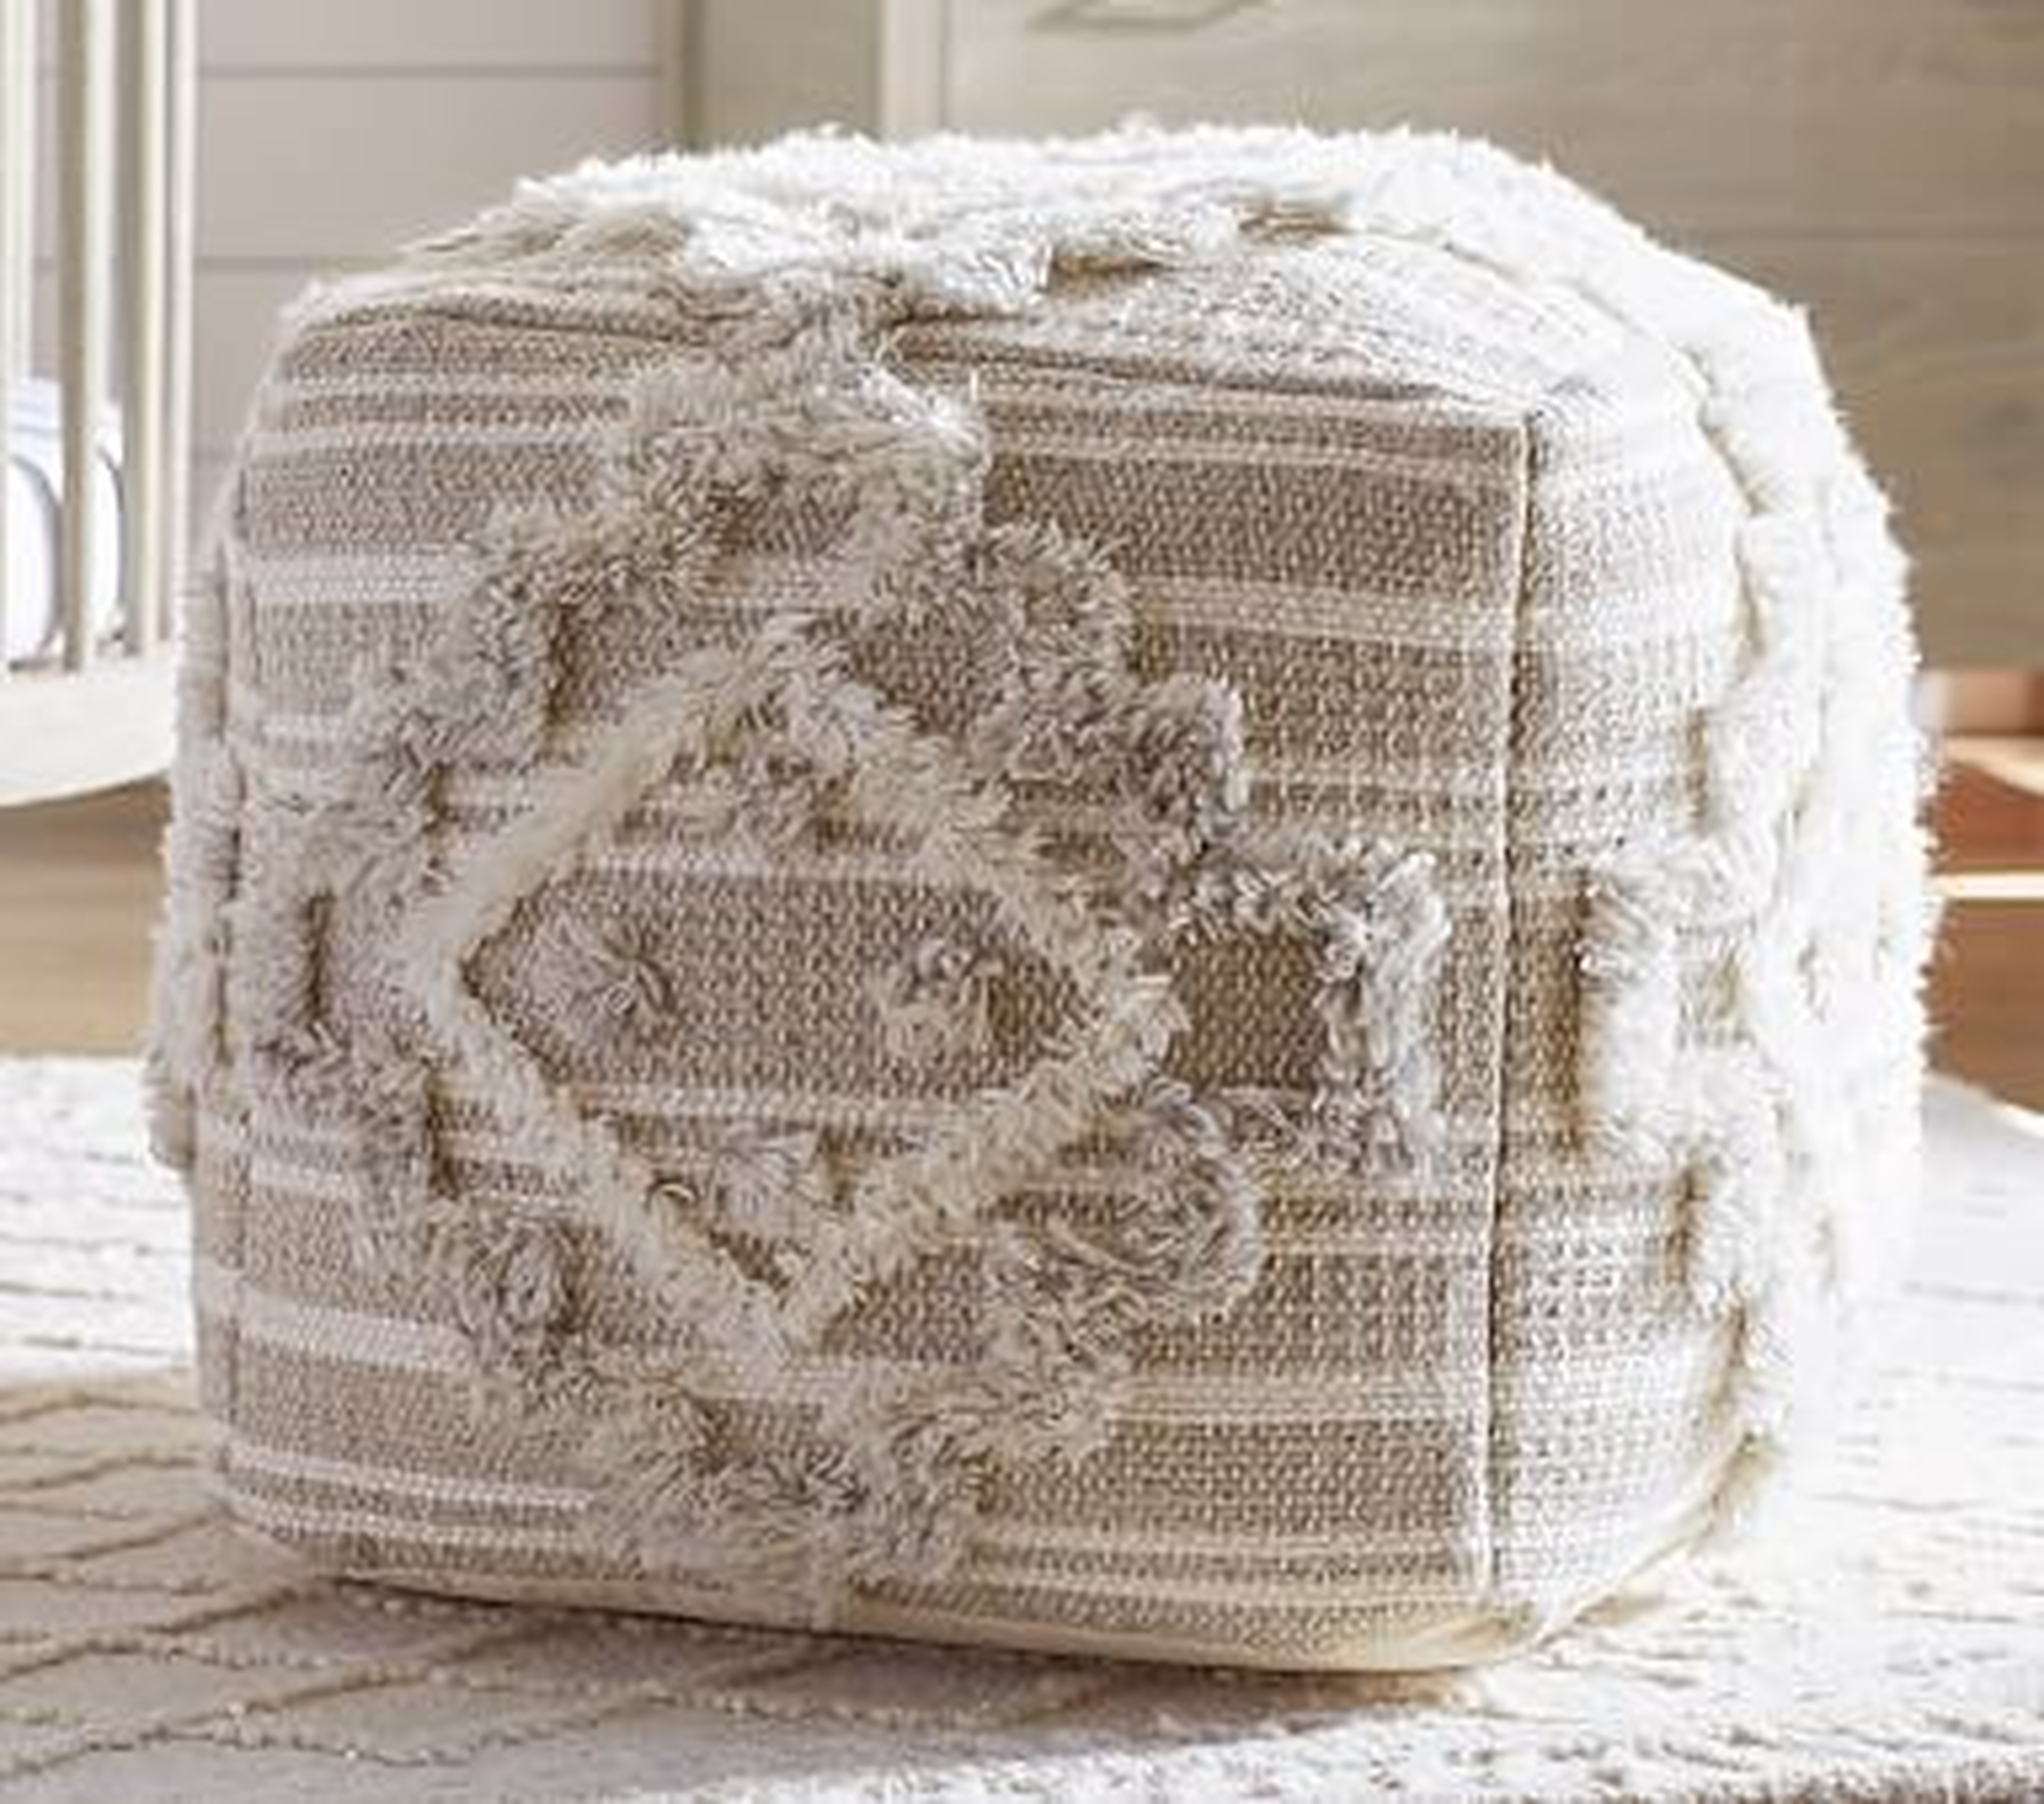 Moroccan Tufted Pouf, Natural/White - Pottery Barn Kids